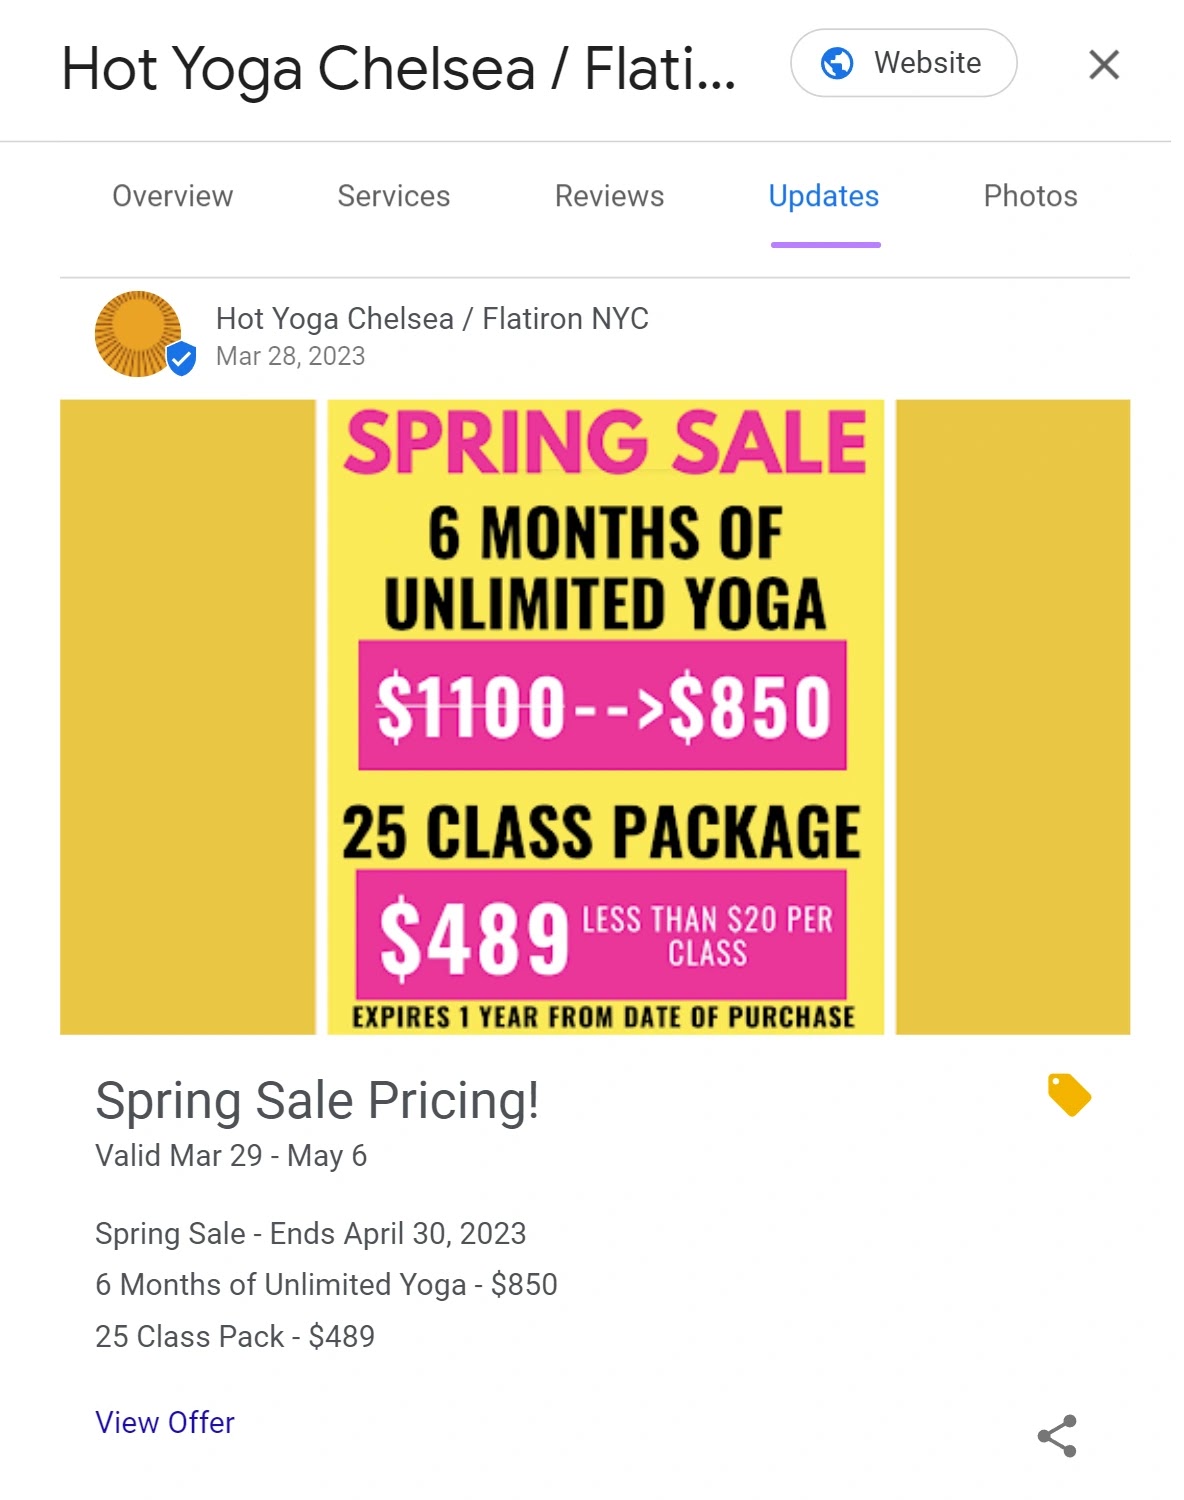 Google Business Profile update on a new yoga class pricing package